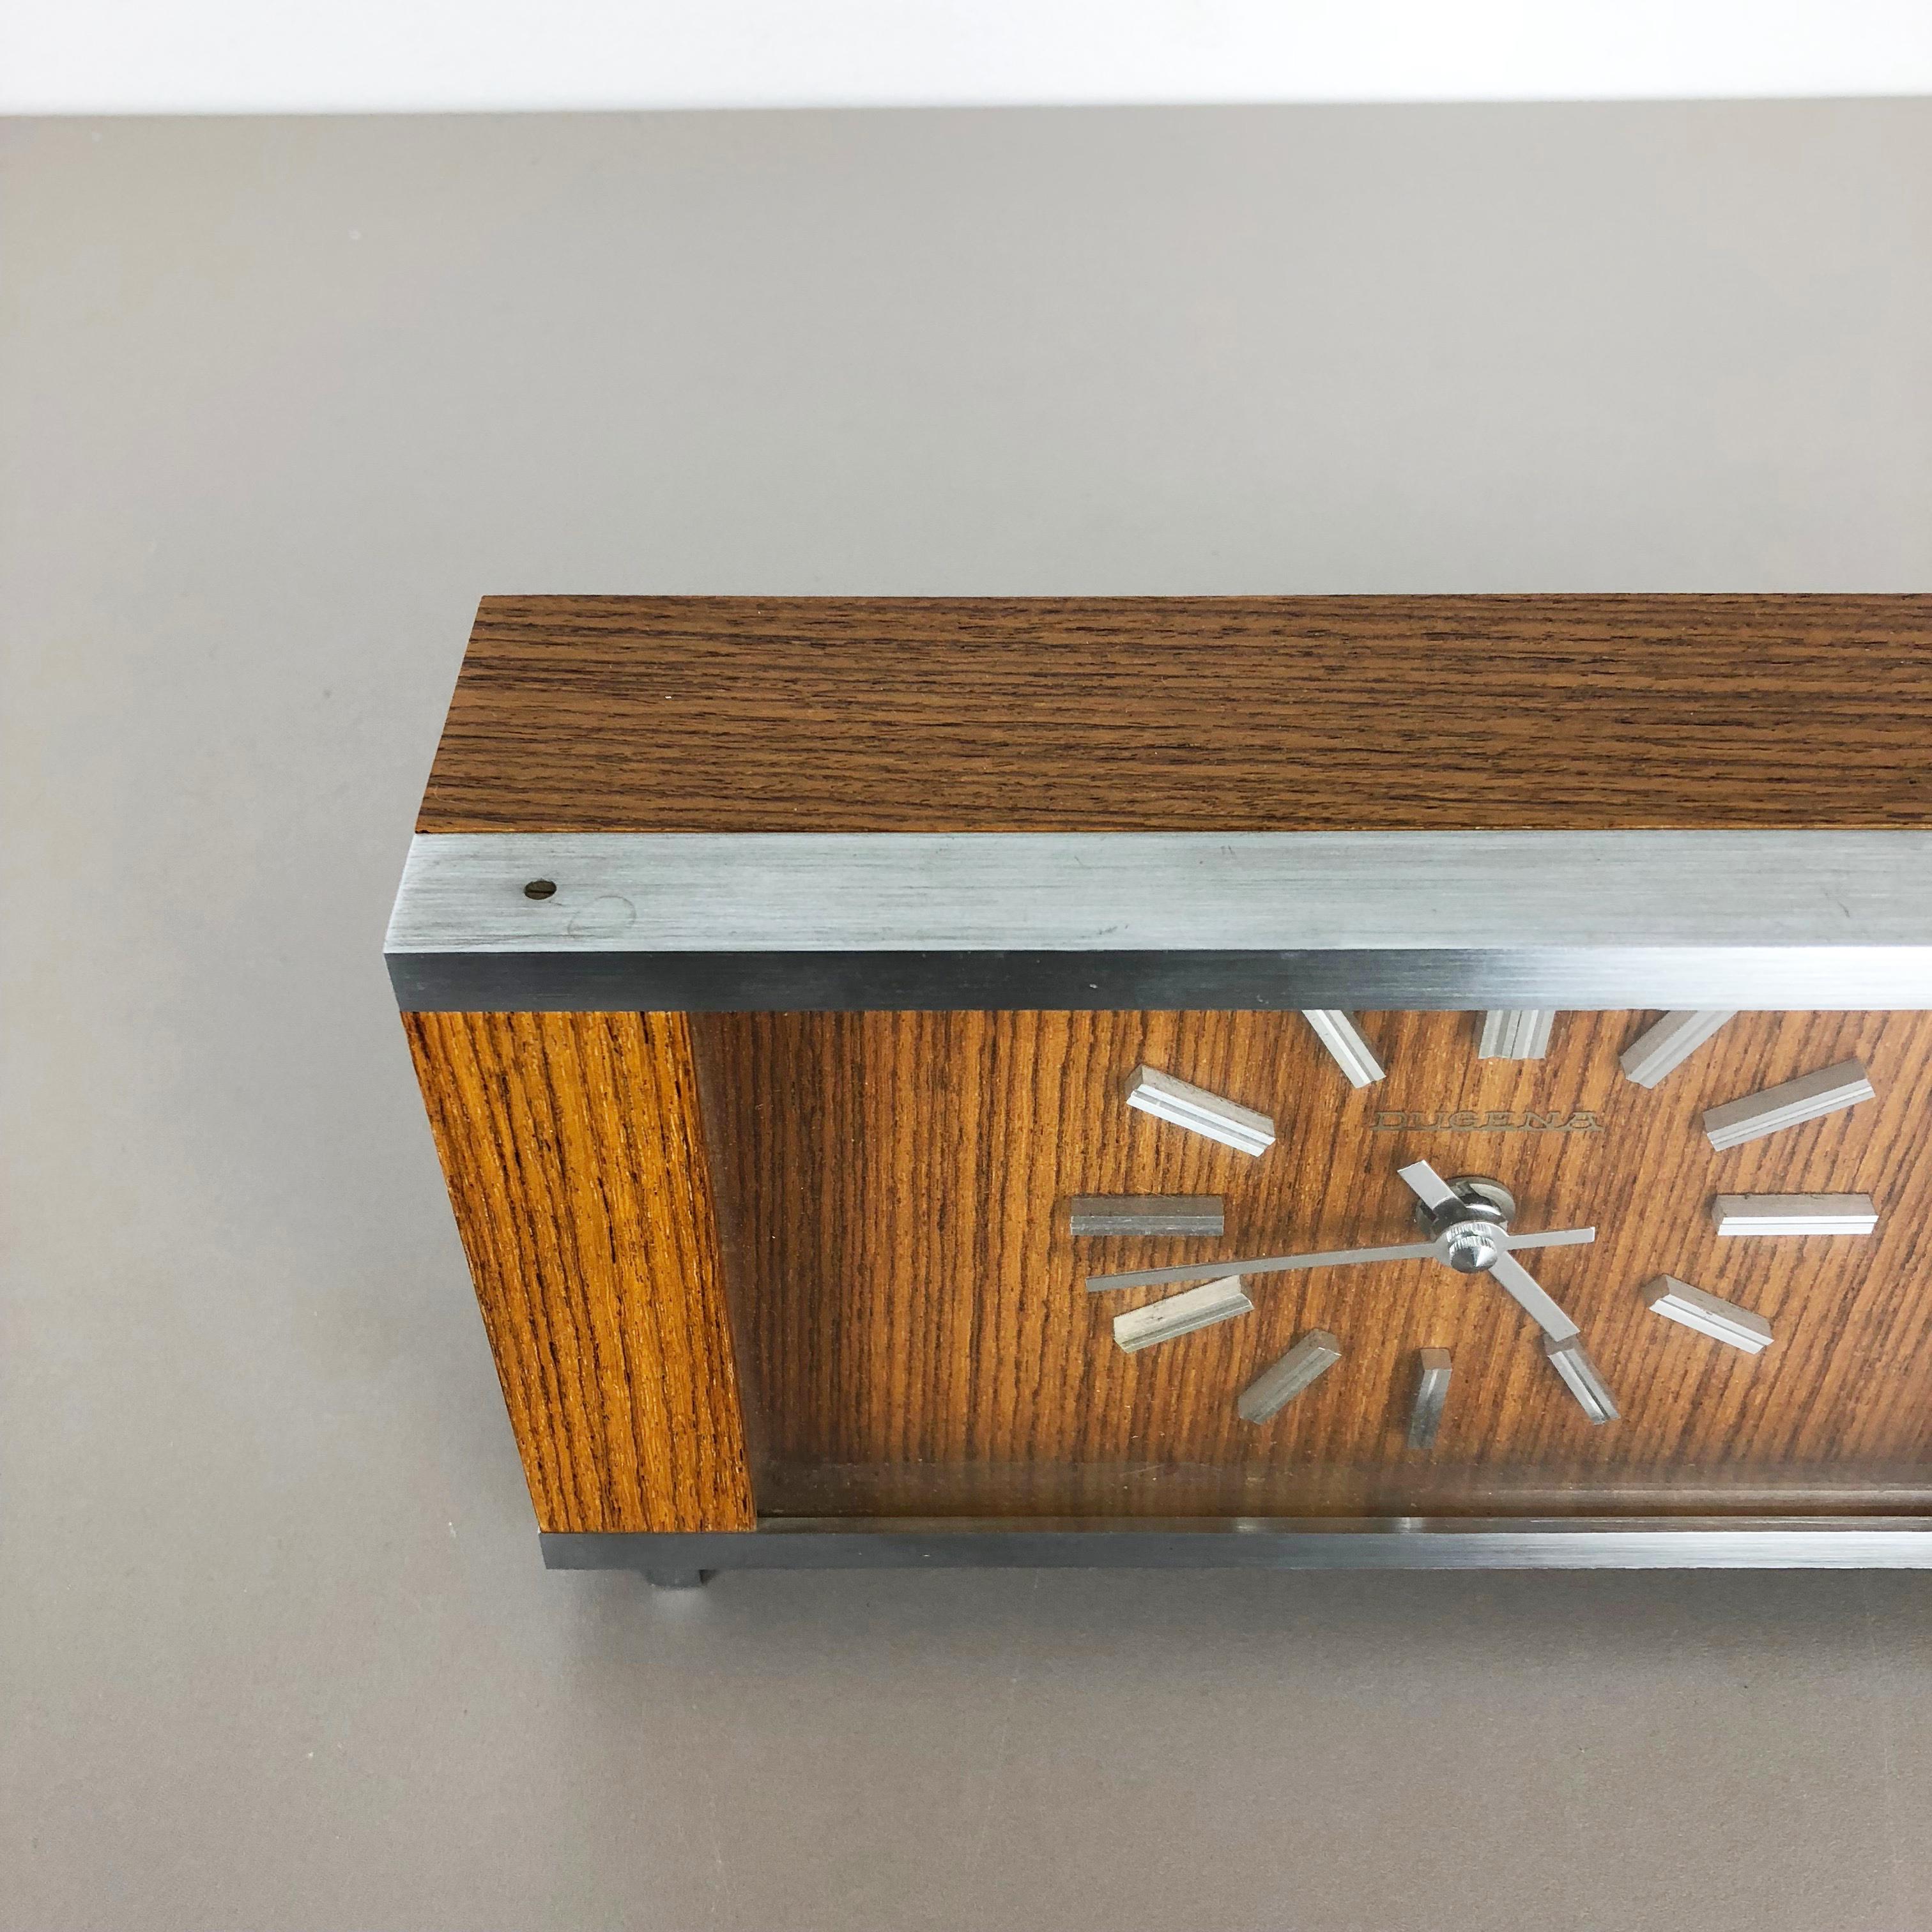 Vintage 1960s Modernist Wooden Table Clock by Dugena, Germany 1